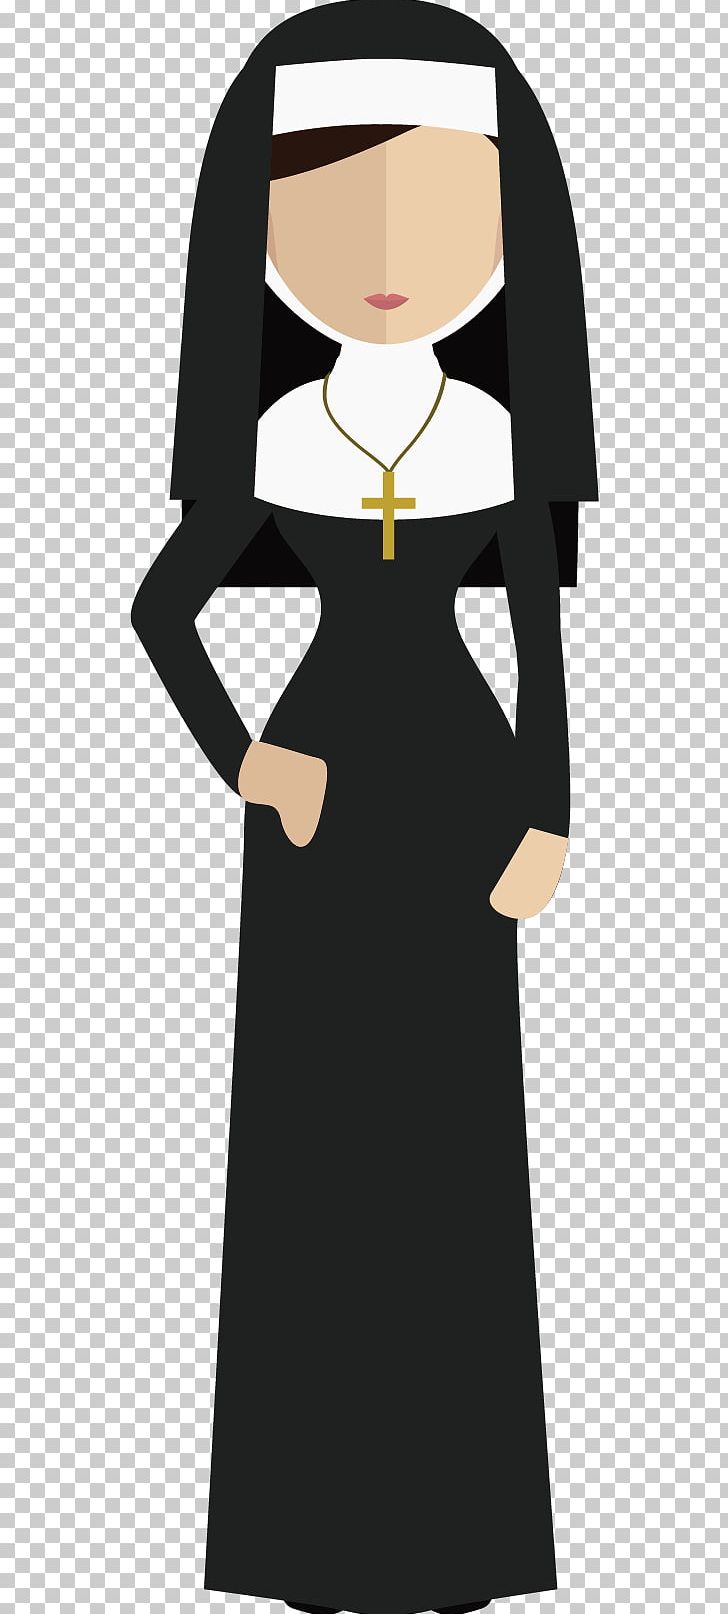 Cartoon Drawing Dessin Animxc3xa9 Animation Church PNG, Clipart, Black, Catholic, Fictional Character, Field Of Cartoon Characters, Field Personnel Free PNG Download